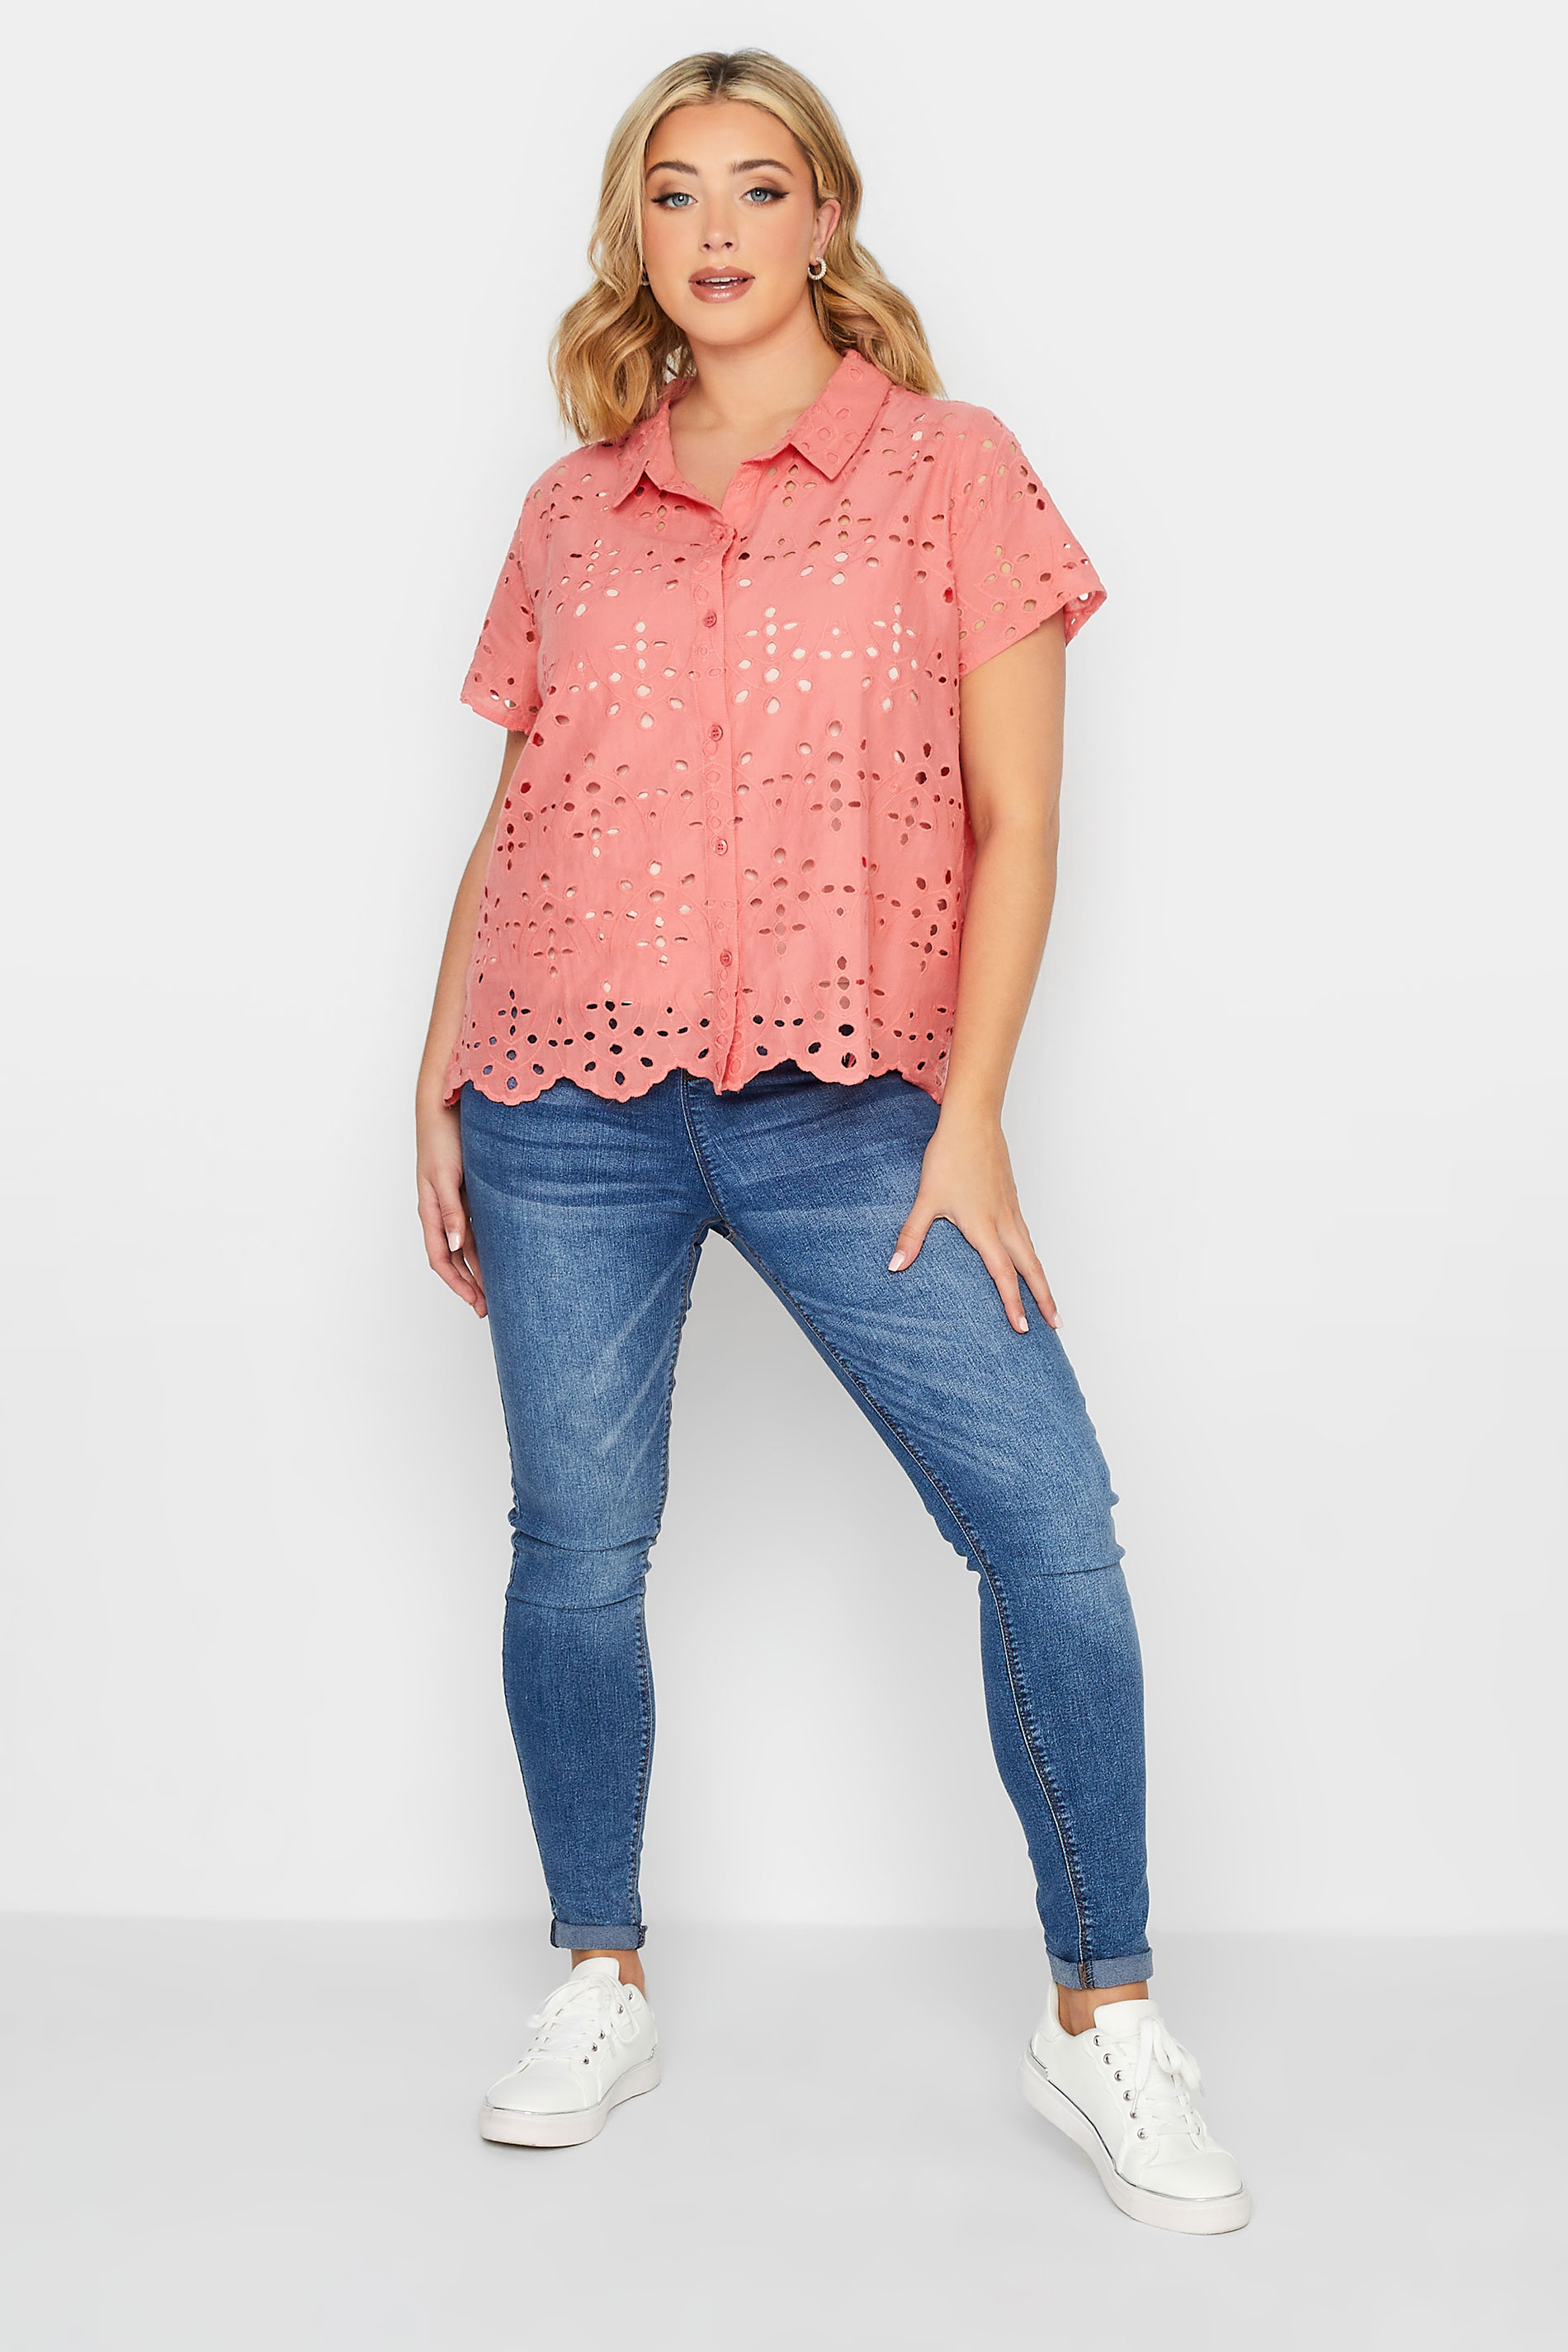 YOURS PETITE Plus Size Coral Pink Broderie Anglaise Short Sleeve Shirt | Yours Clothing 2